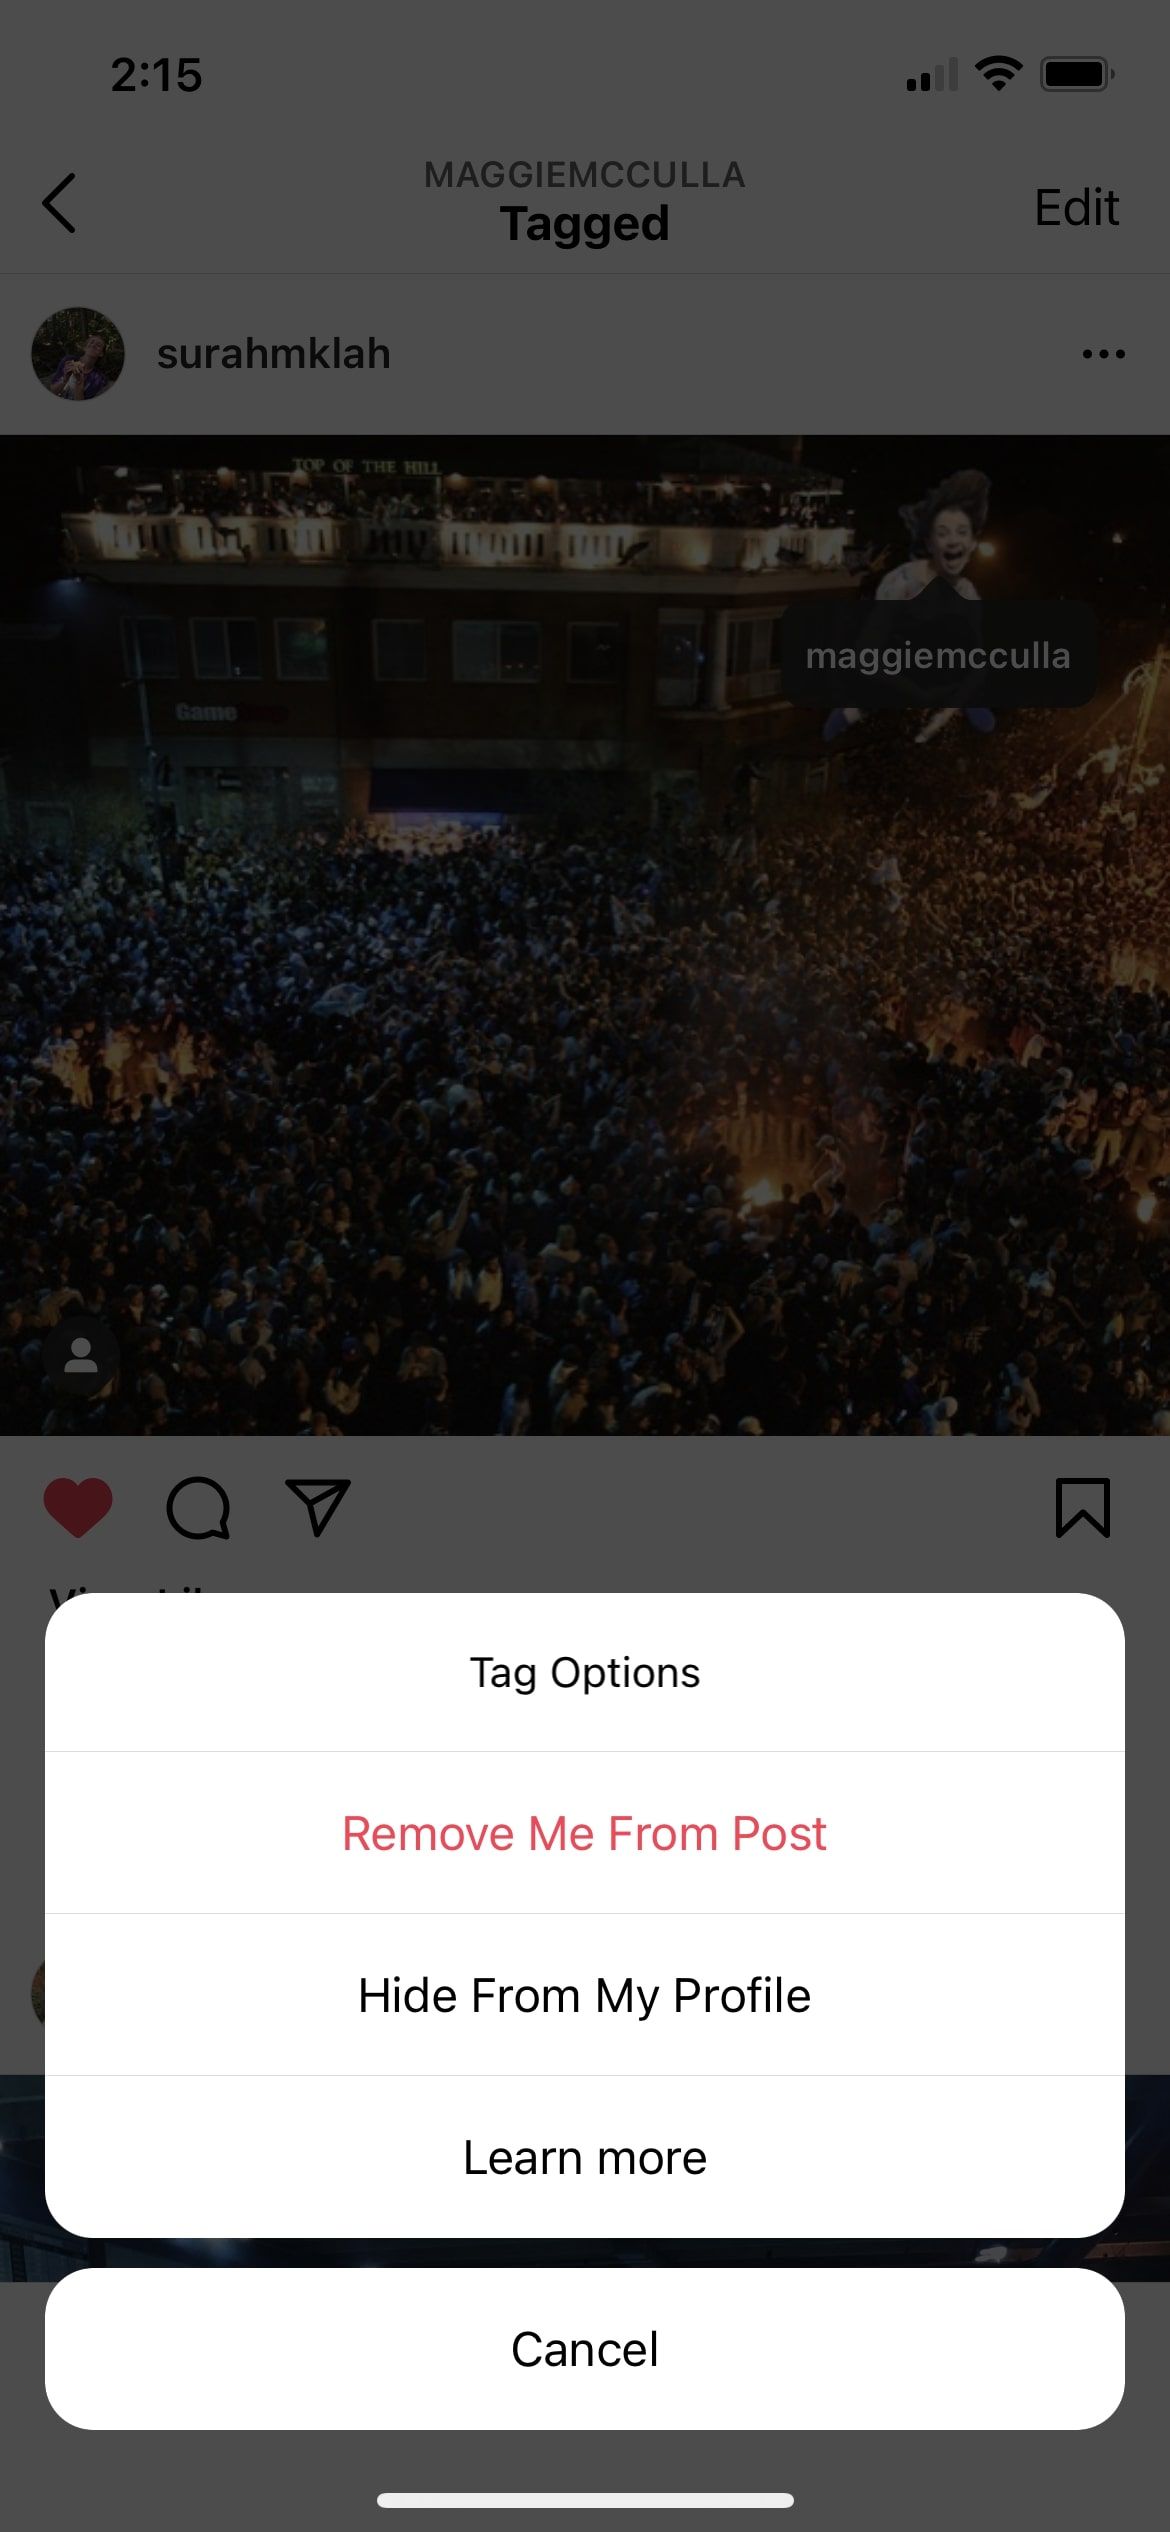 Screenshot of tagged photo options on Instagram